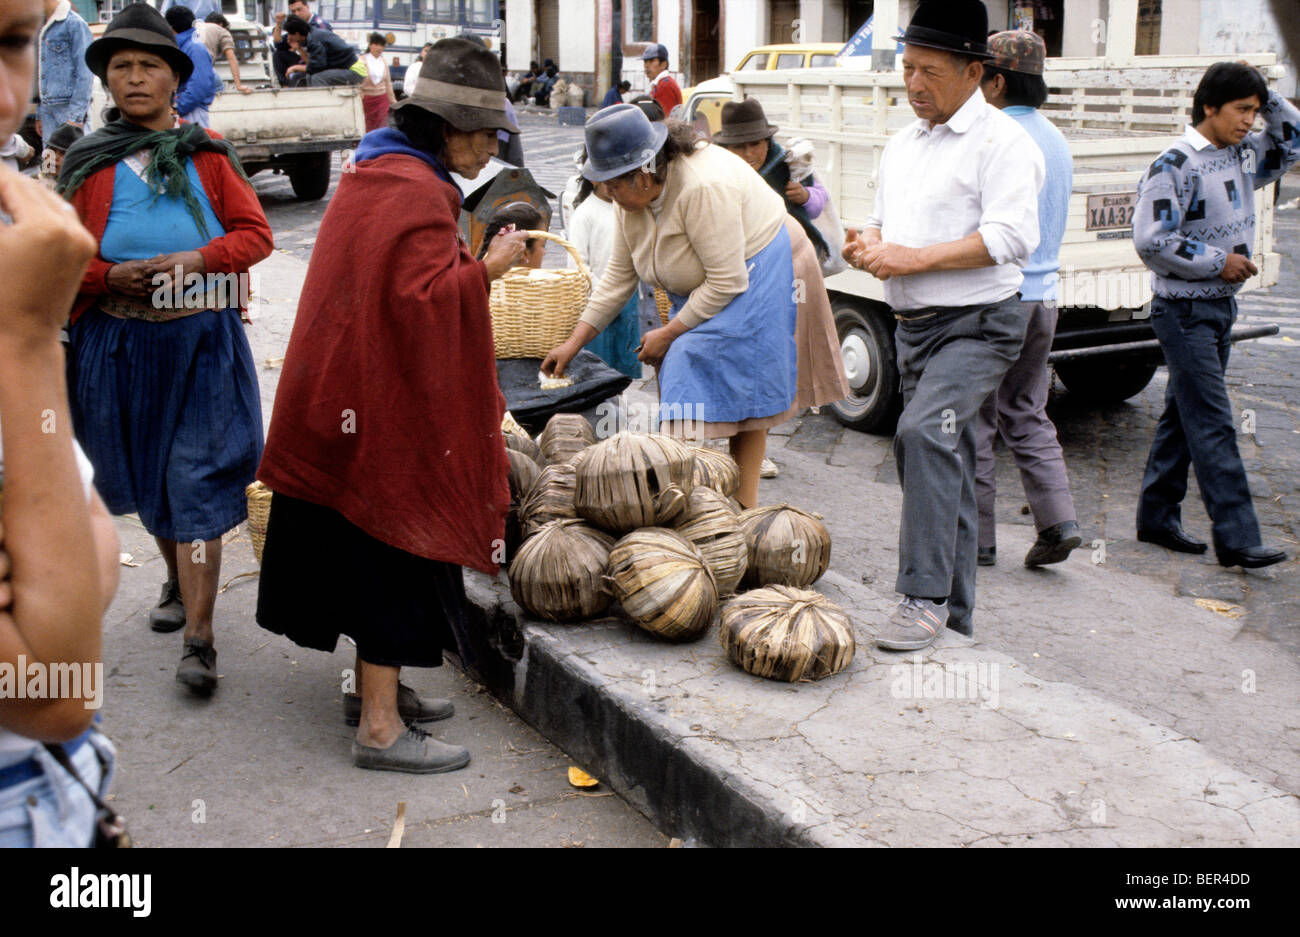 Sugar seller.  Large flattened soccer ball sized cakes of raw sugar wrapped in leaves.  Ecuador highlands local market. Stock Photo